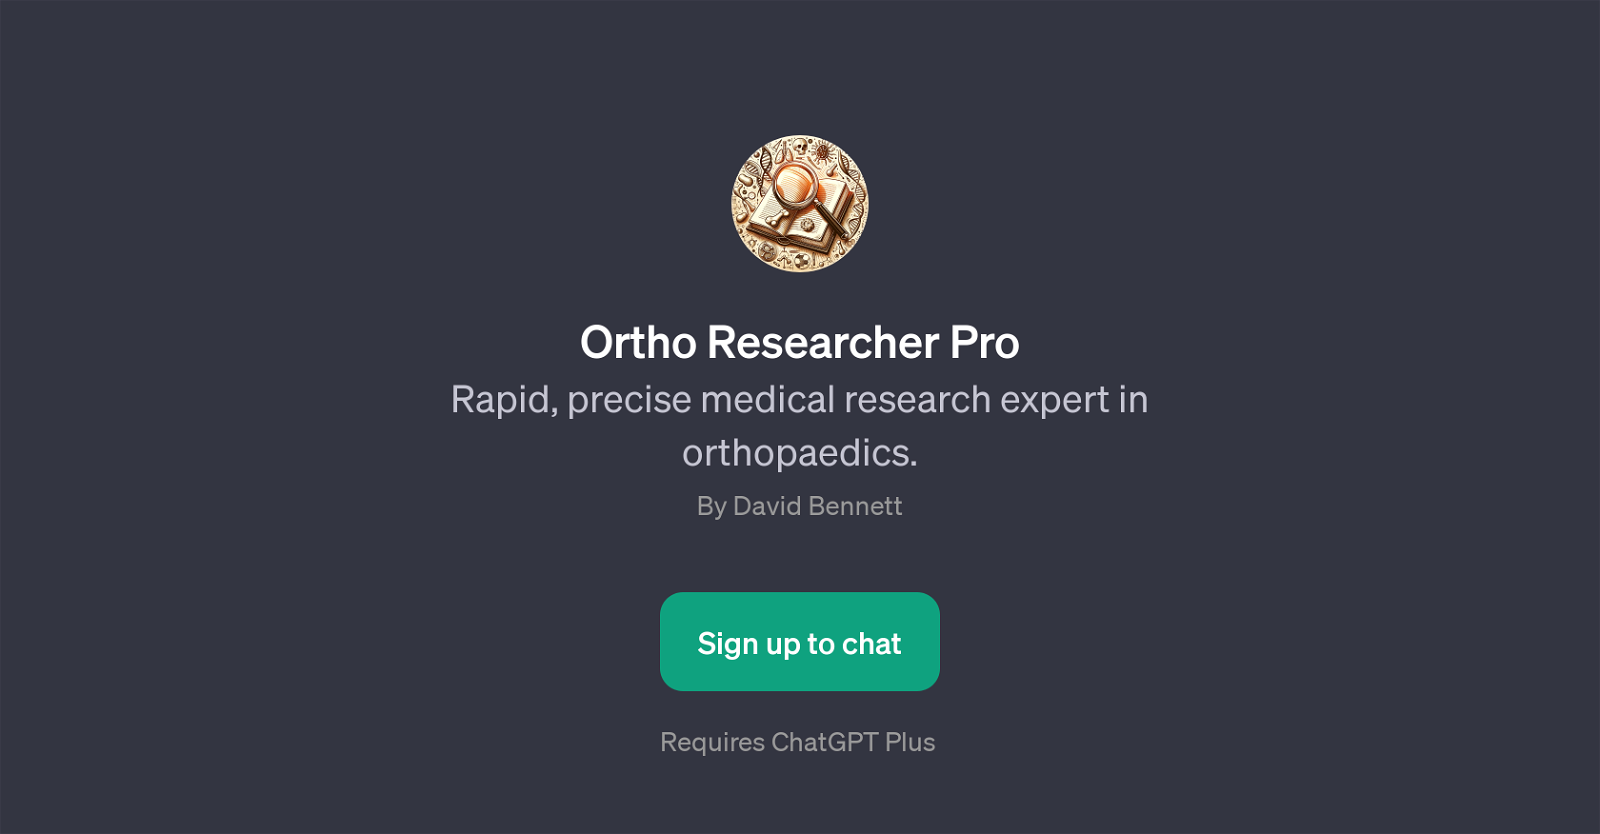 Ortho Researcher Pro website